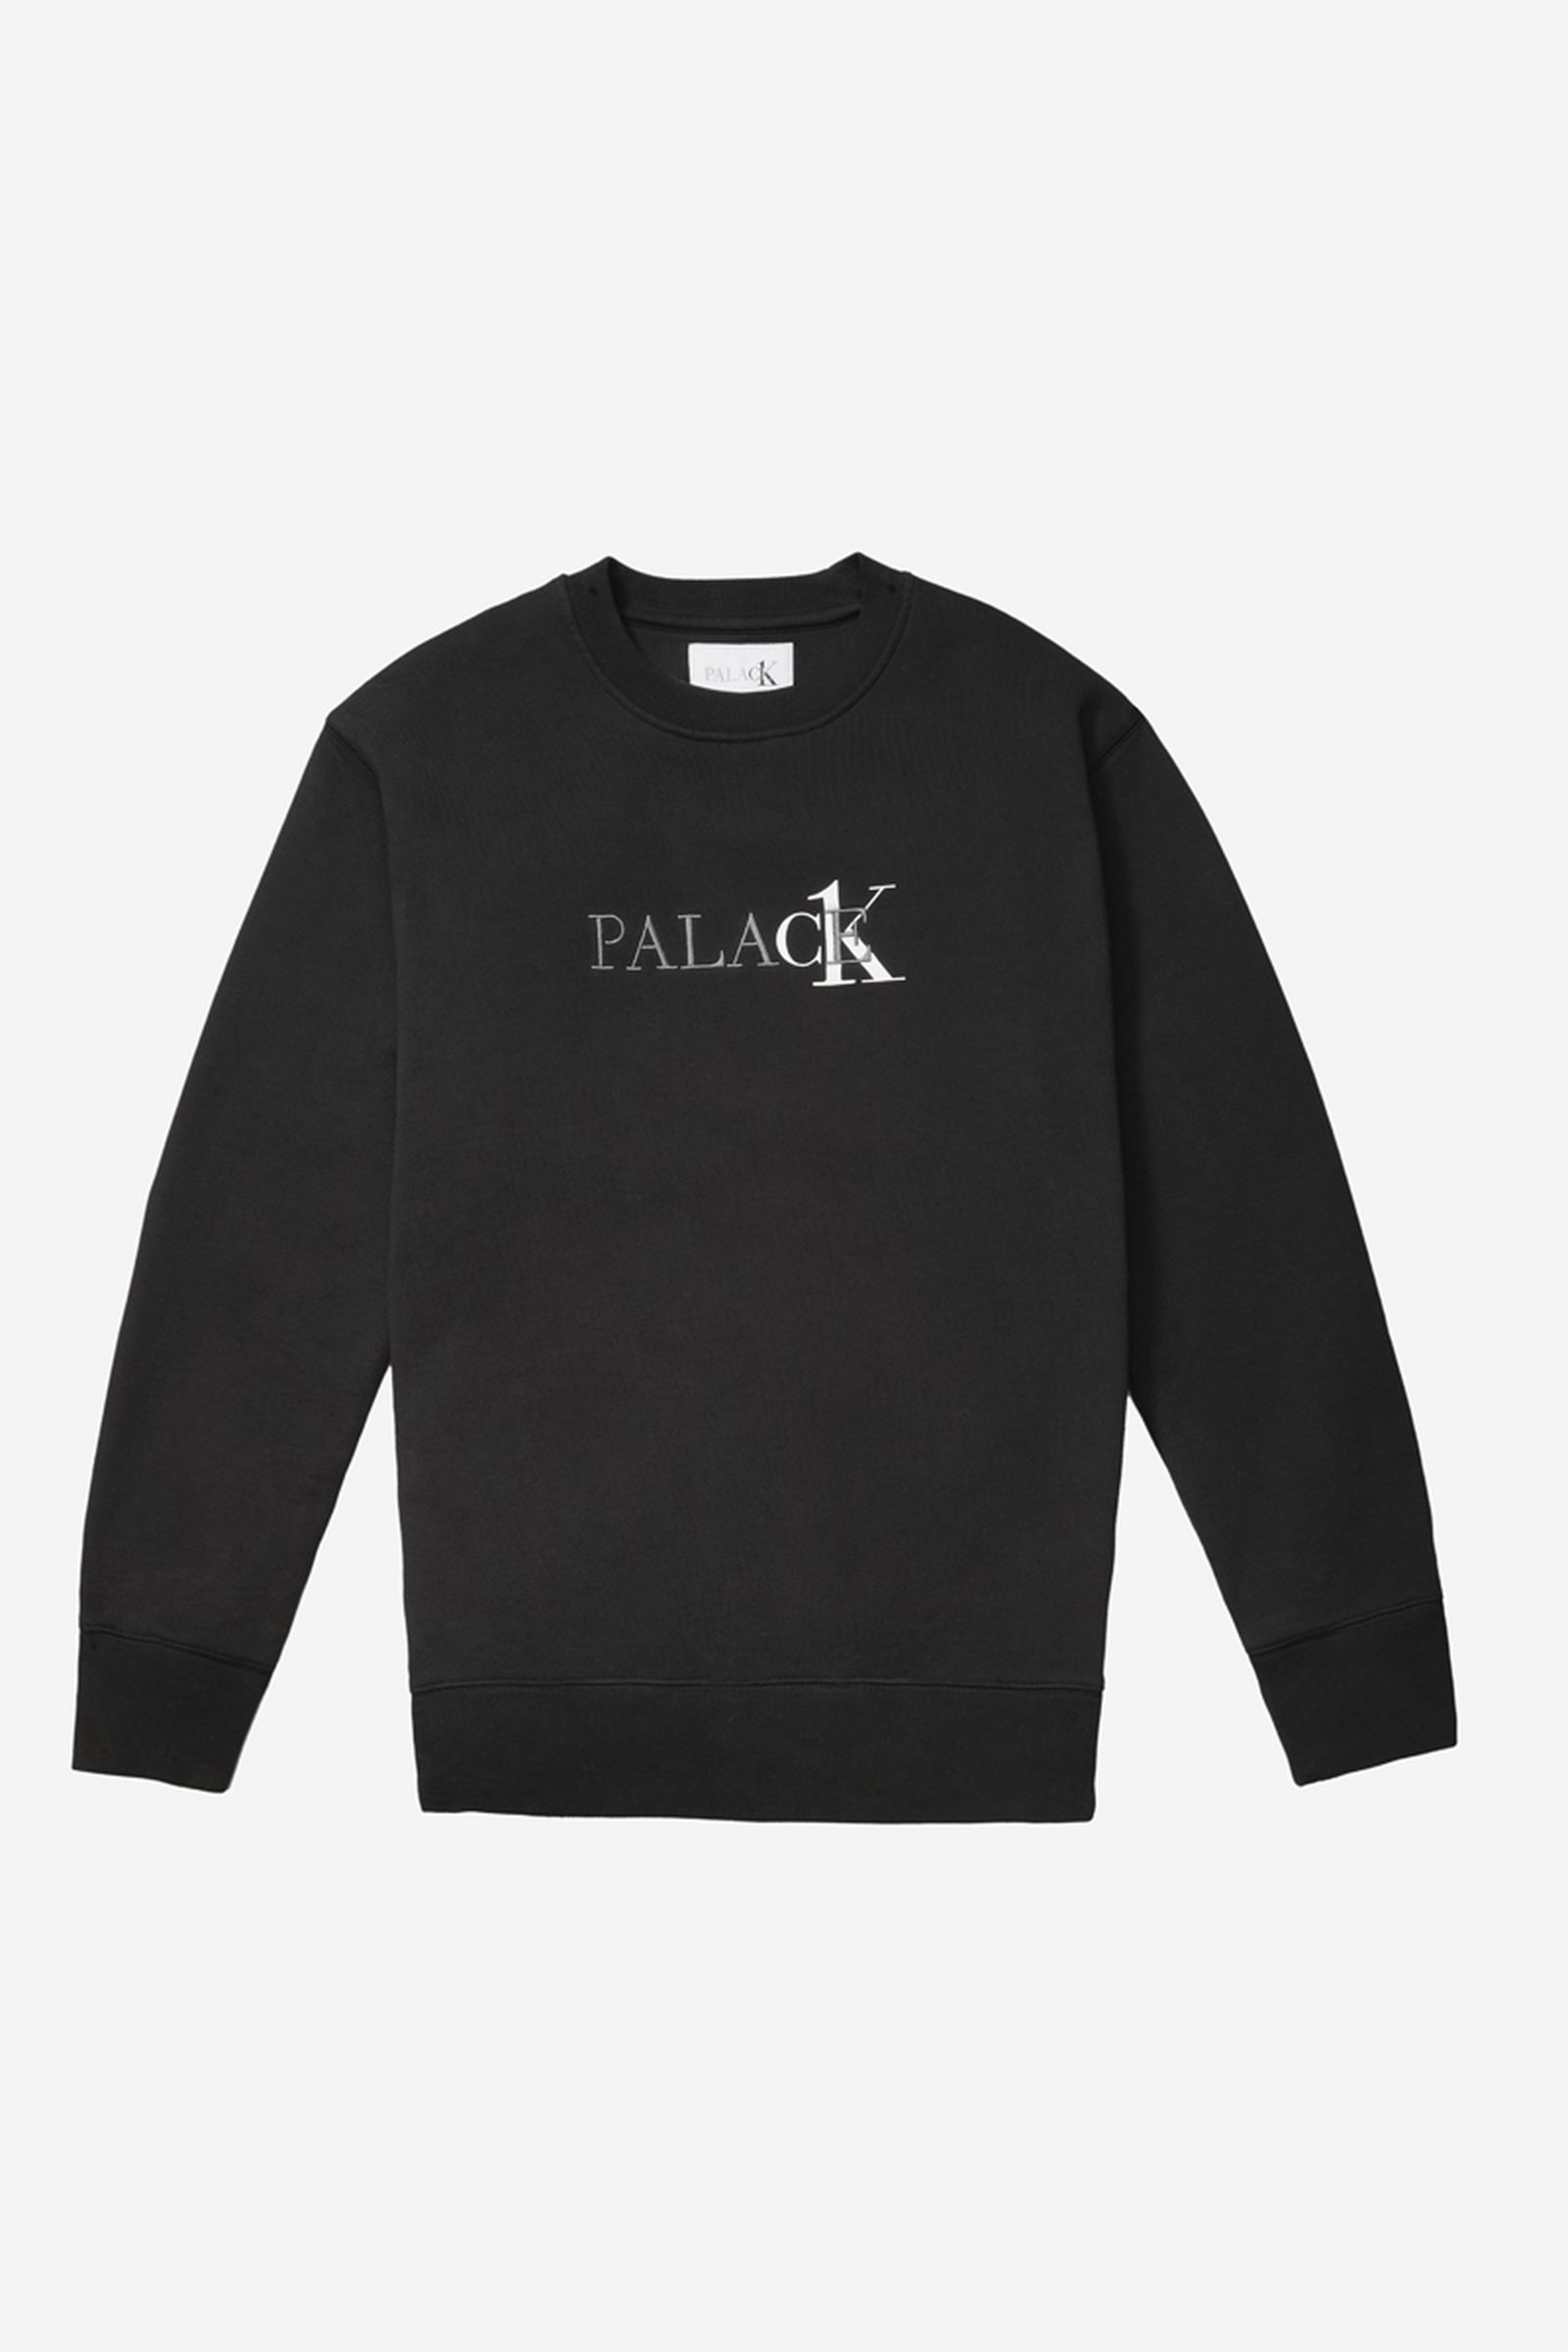 palace-calvin-klein-collab-collection-price-underwear-release-date (30)